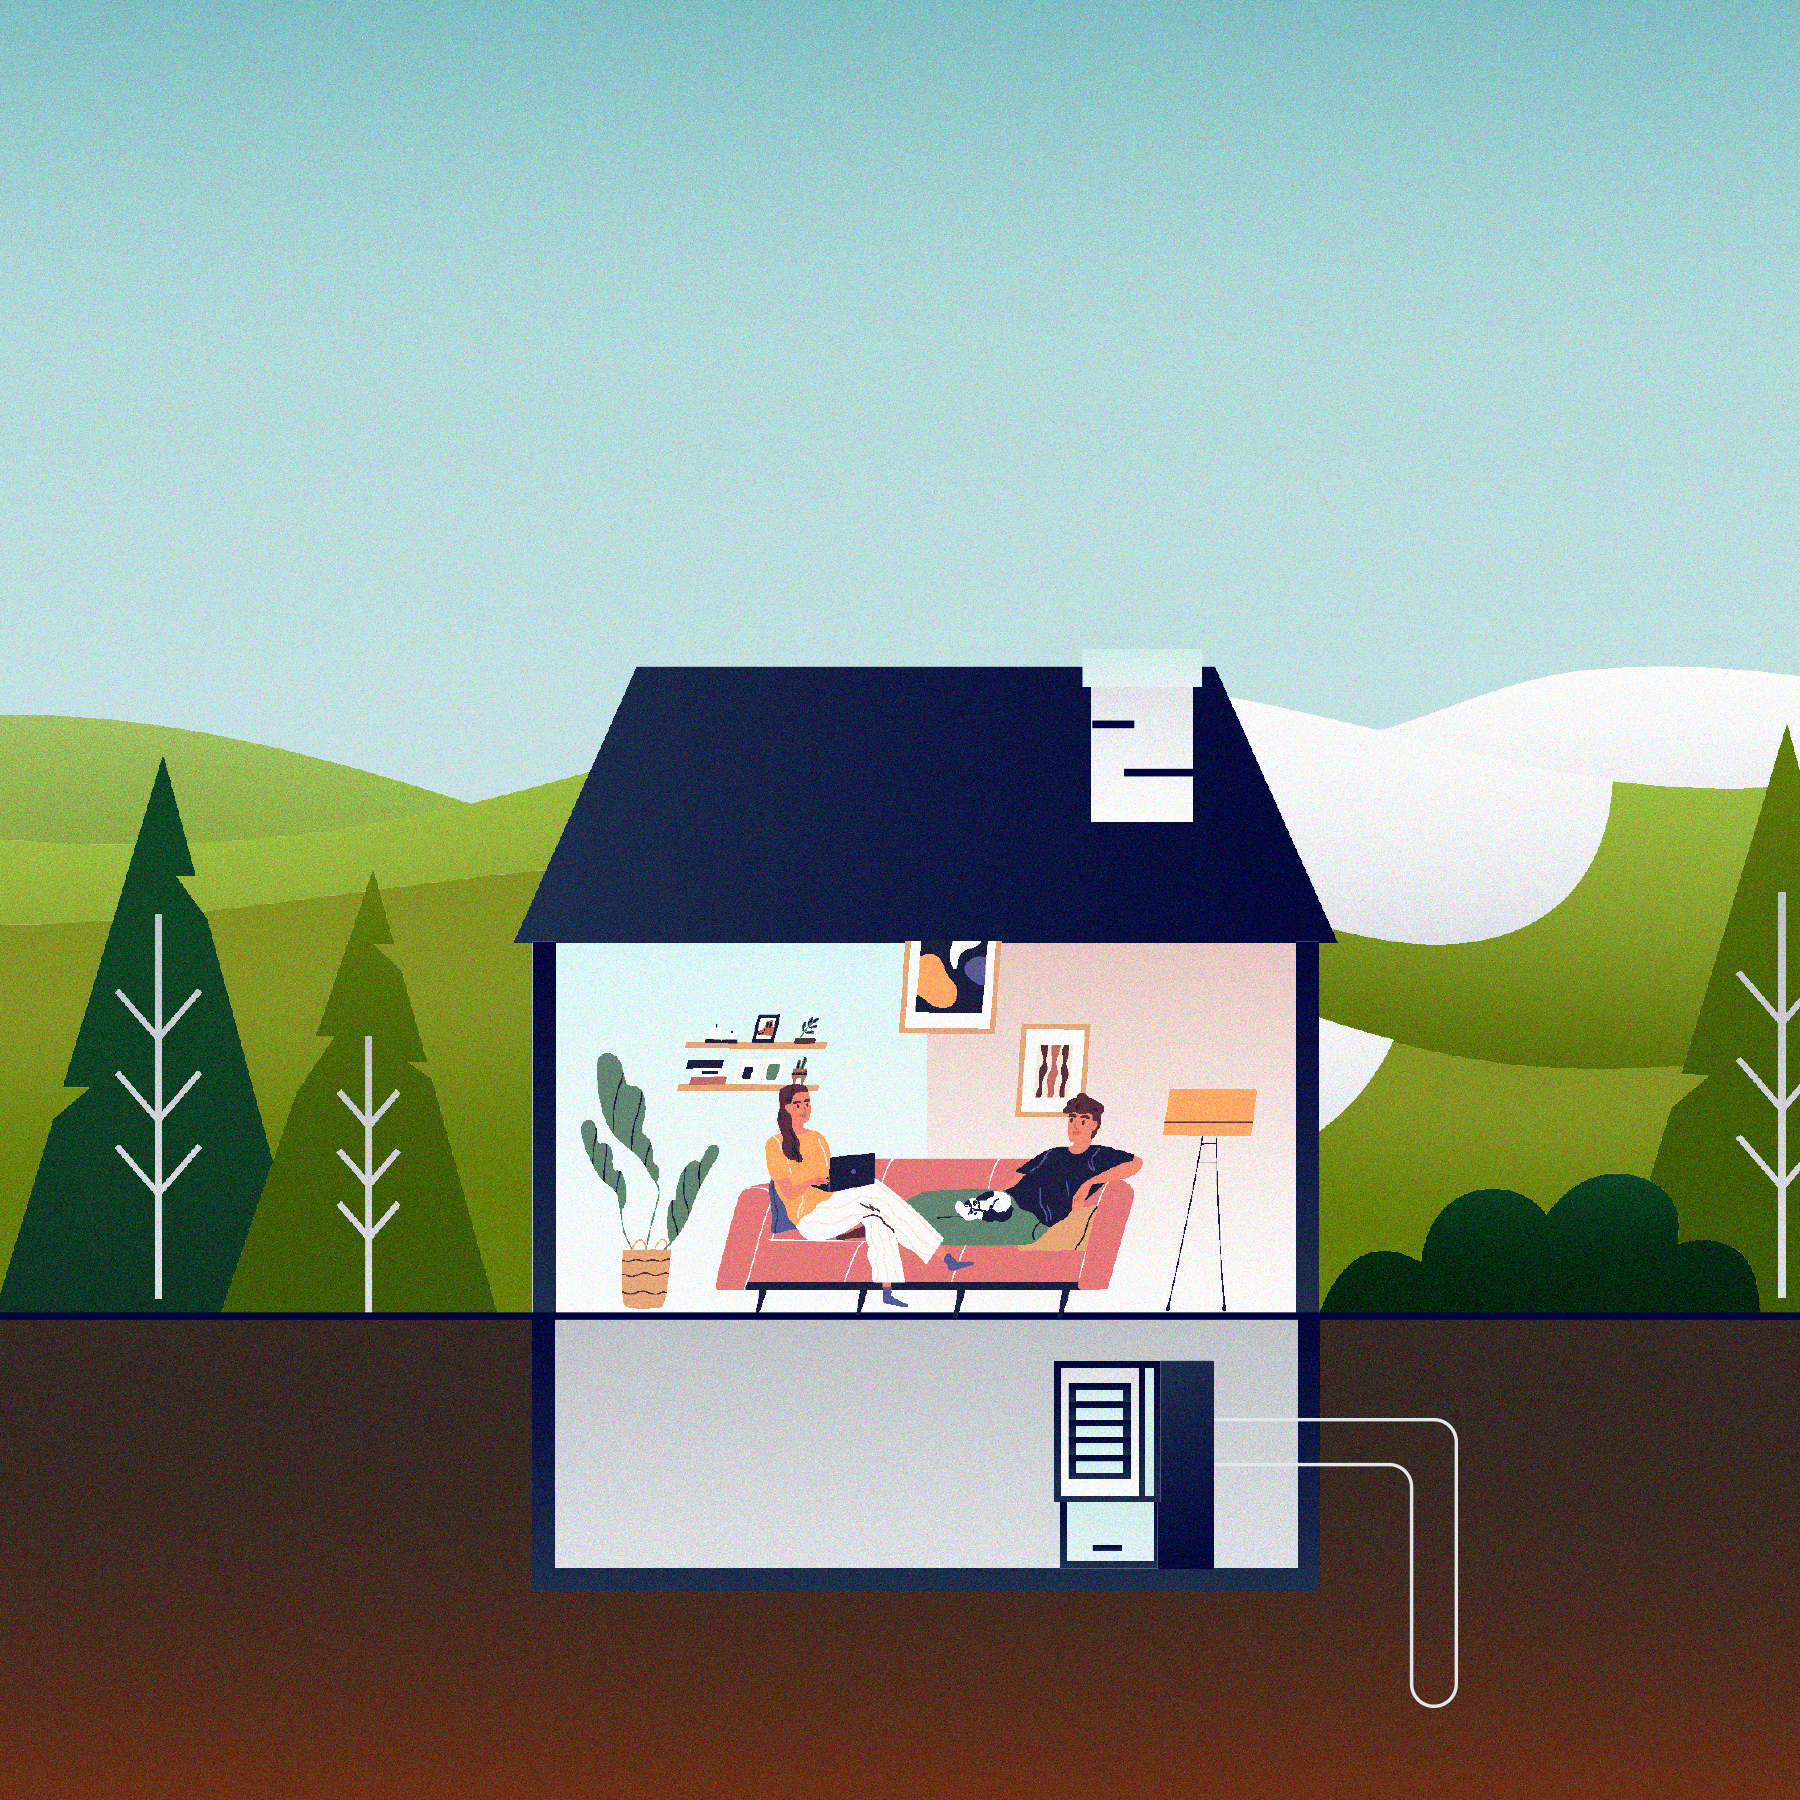 An illustrated house, cut in a cross section with a woman and man on the couch. Half of the scene is a summer scene, with the AC on in the left side of the house and half the scene is winter with the heating on. There is a Dandelion brand geothermal unit in the basement.